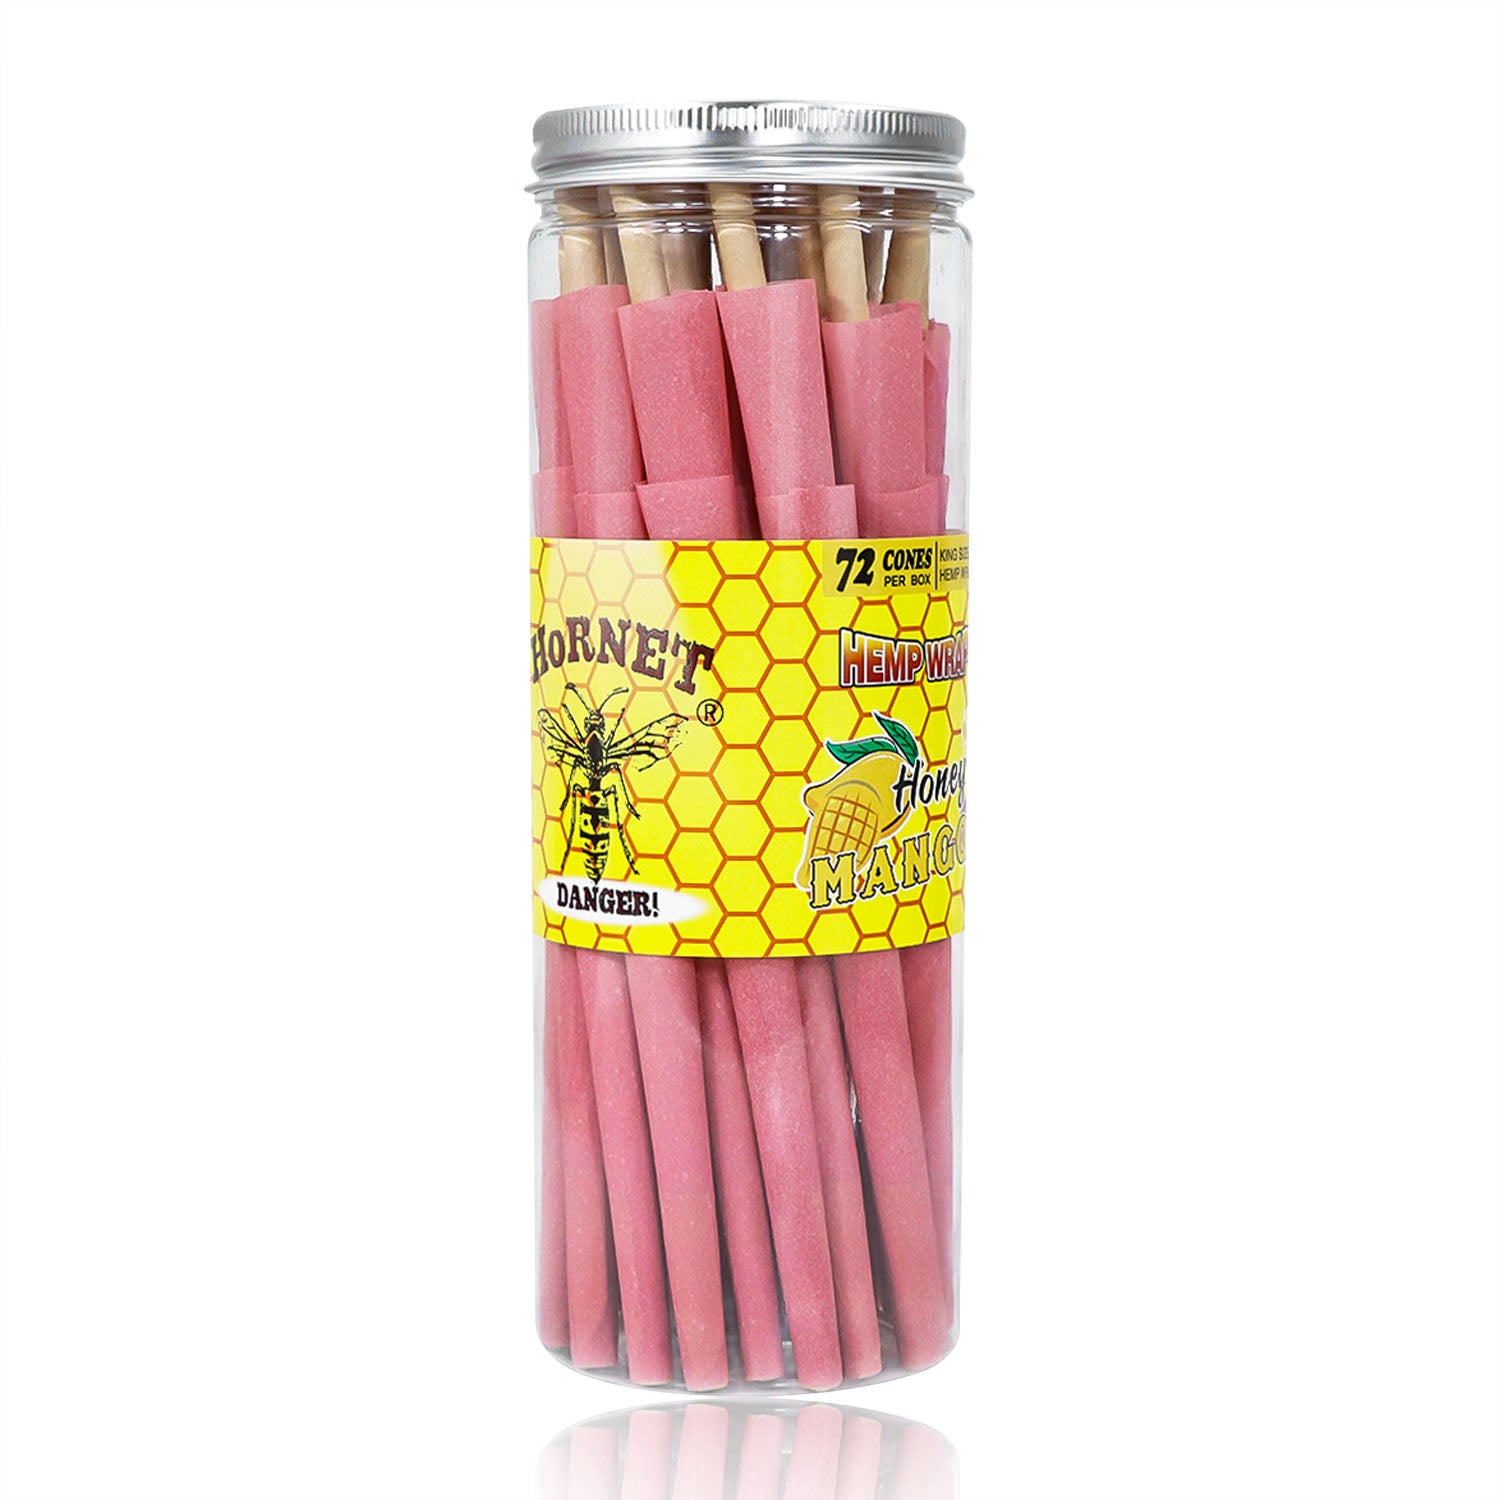 HORNET MANGO Flavored Pink Pre Rolled Cones, King Size Pre Rolled Rolling Paper with tips, Slow Burning Rolling Cones & load, 72 PCS / Jar